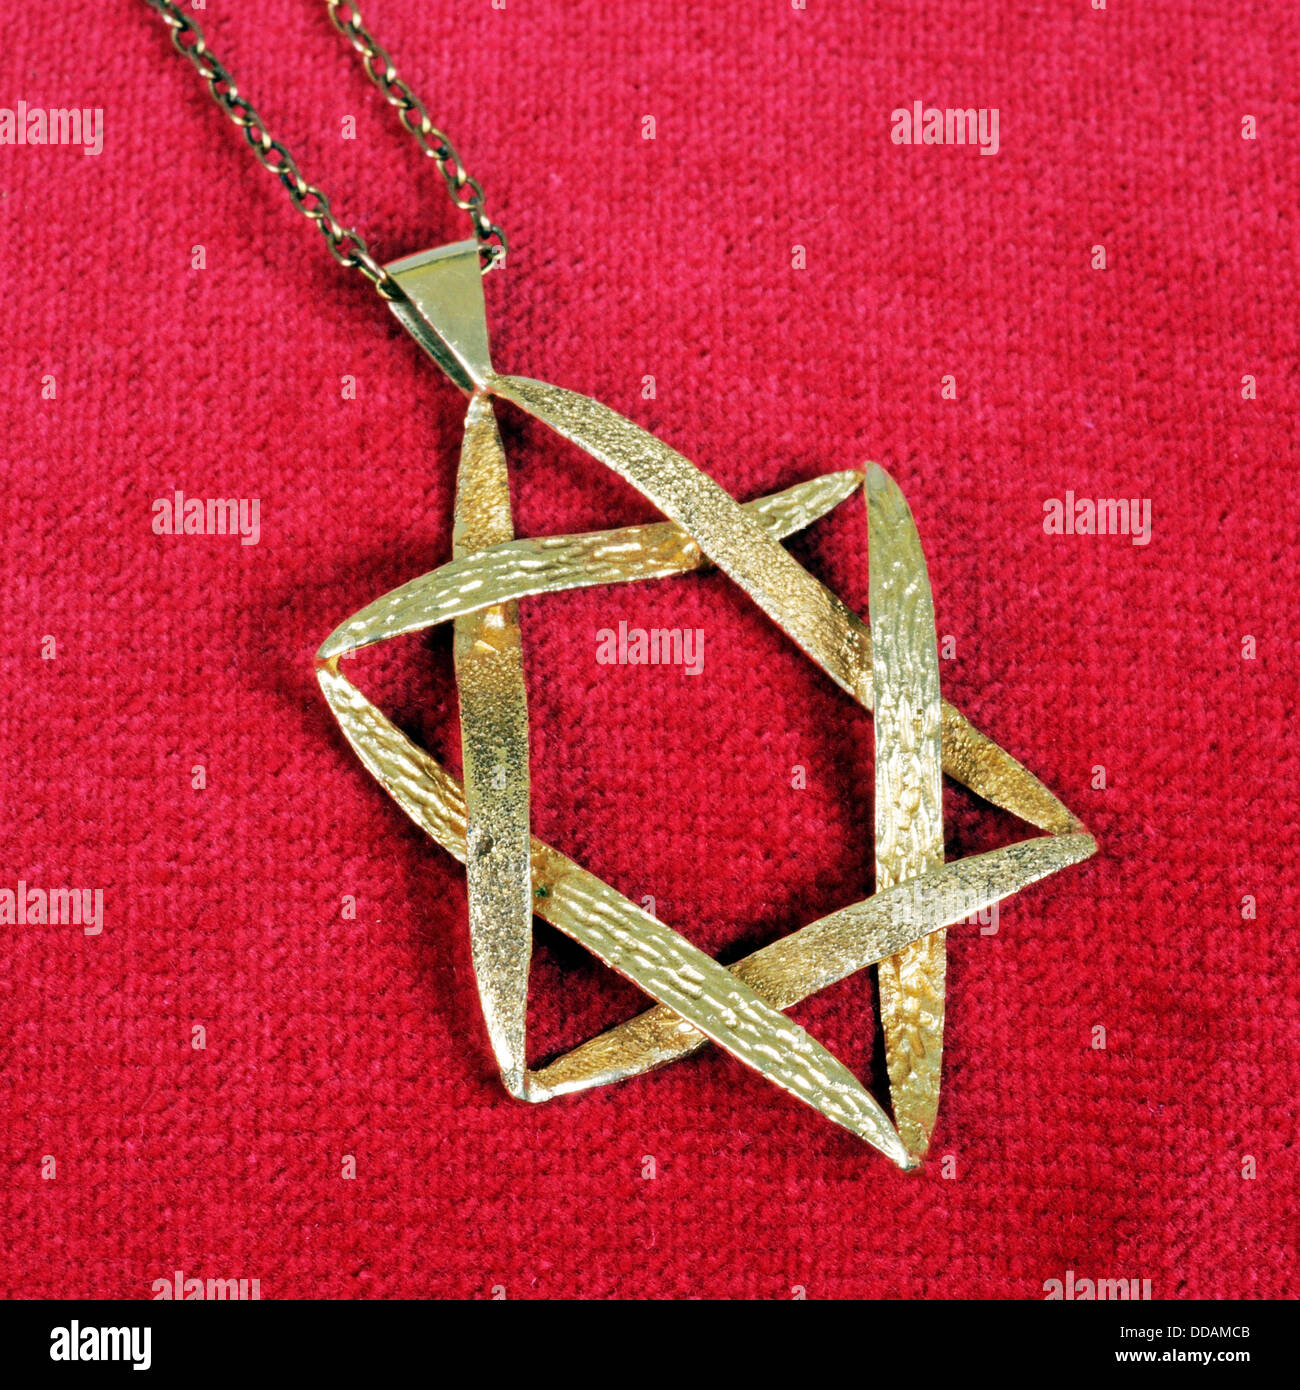 Star of David pendant against a red background. Stock Photo